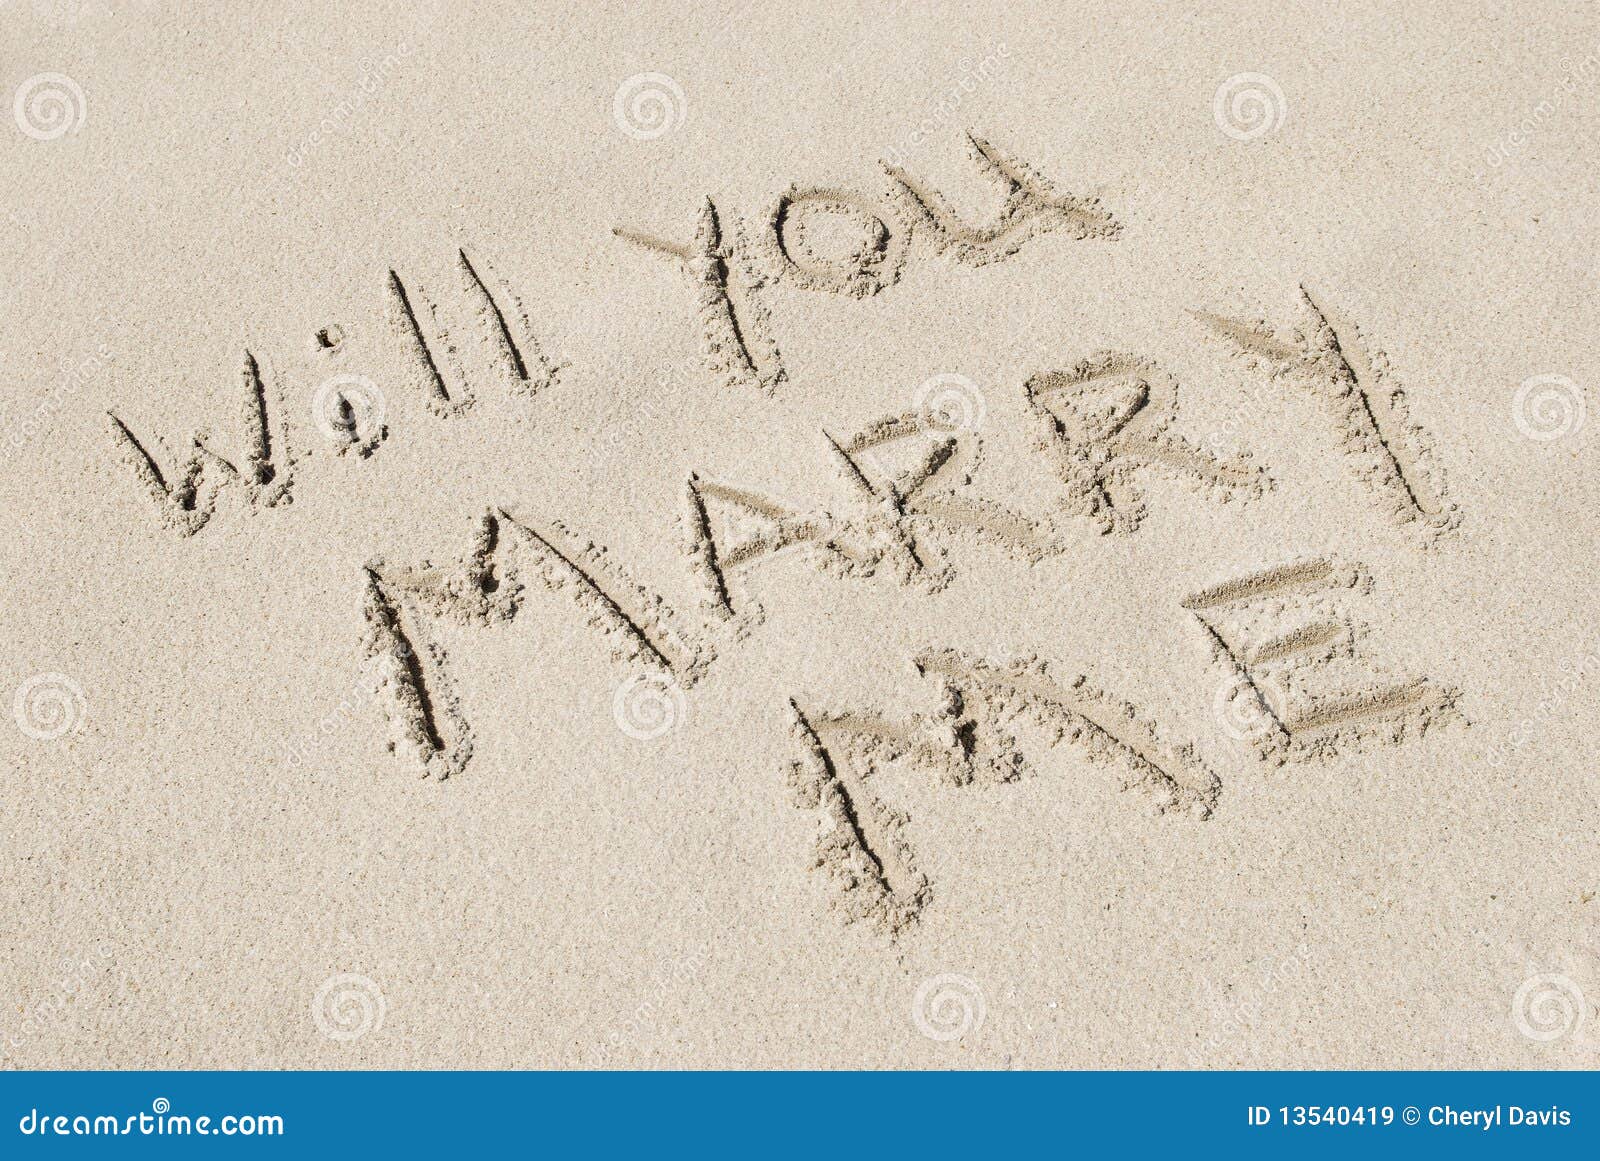 will you marry me written in sand